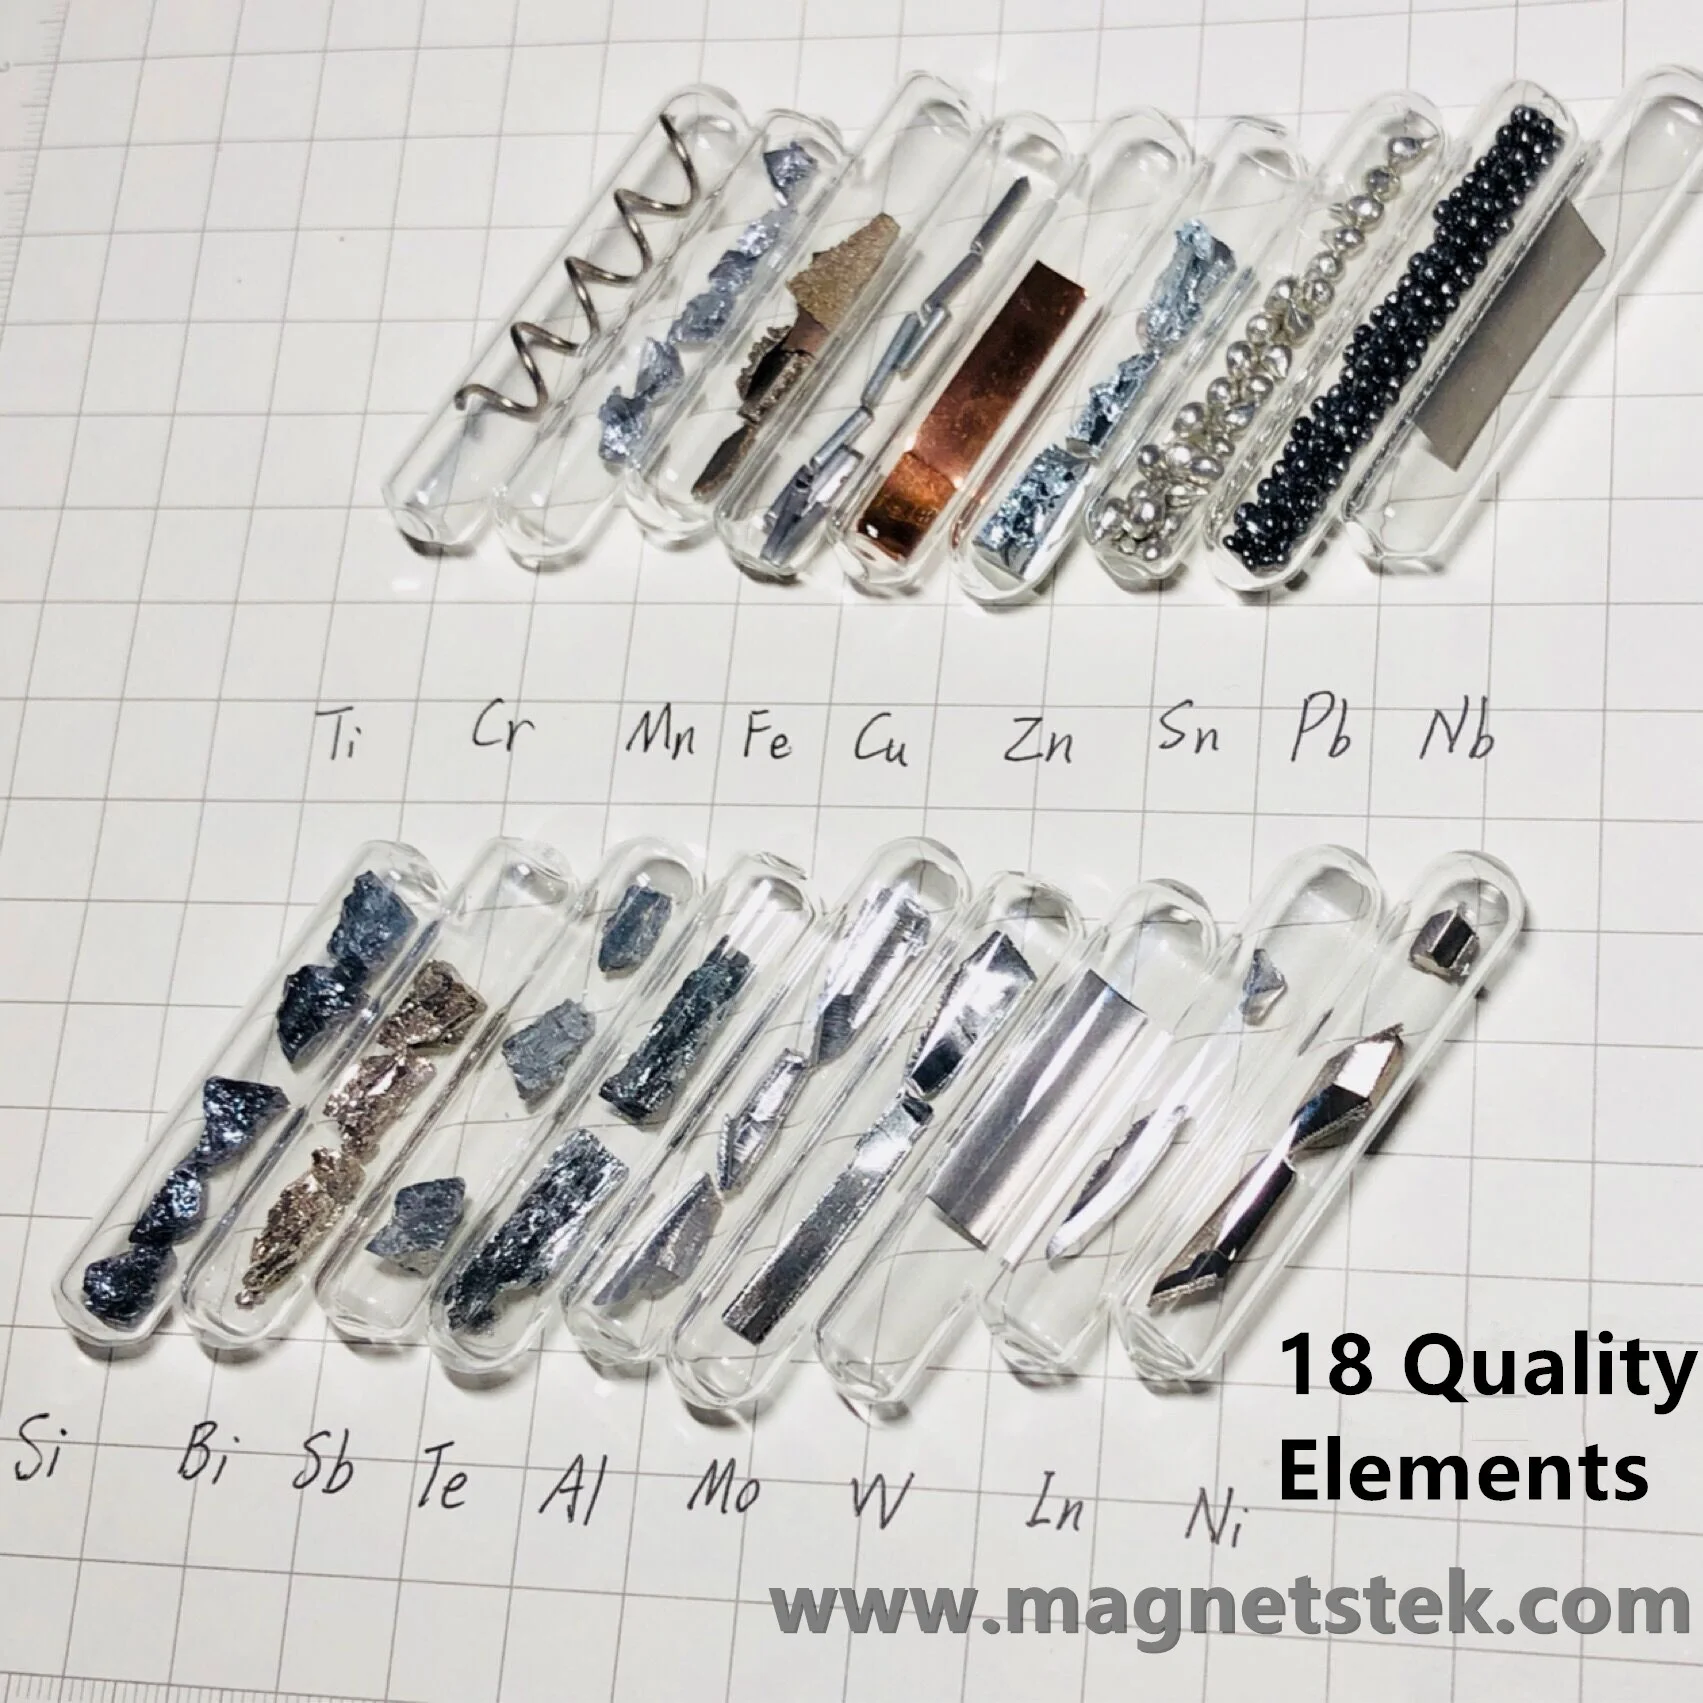 

18 Elements Samples for Element Collection Glass Sealed Ti Cr Mn Fe Cu Zn Sn Nb Si Bi Sb Te Al Mo W In Ni Shinny Looks